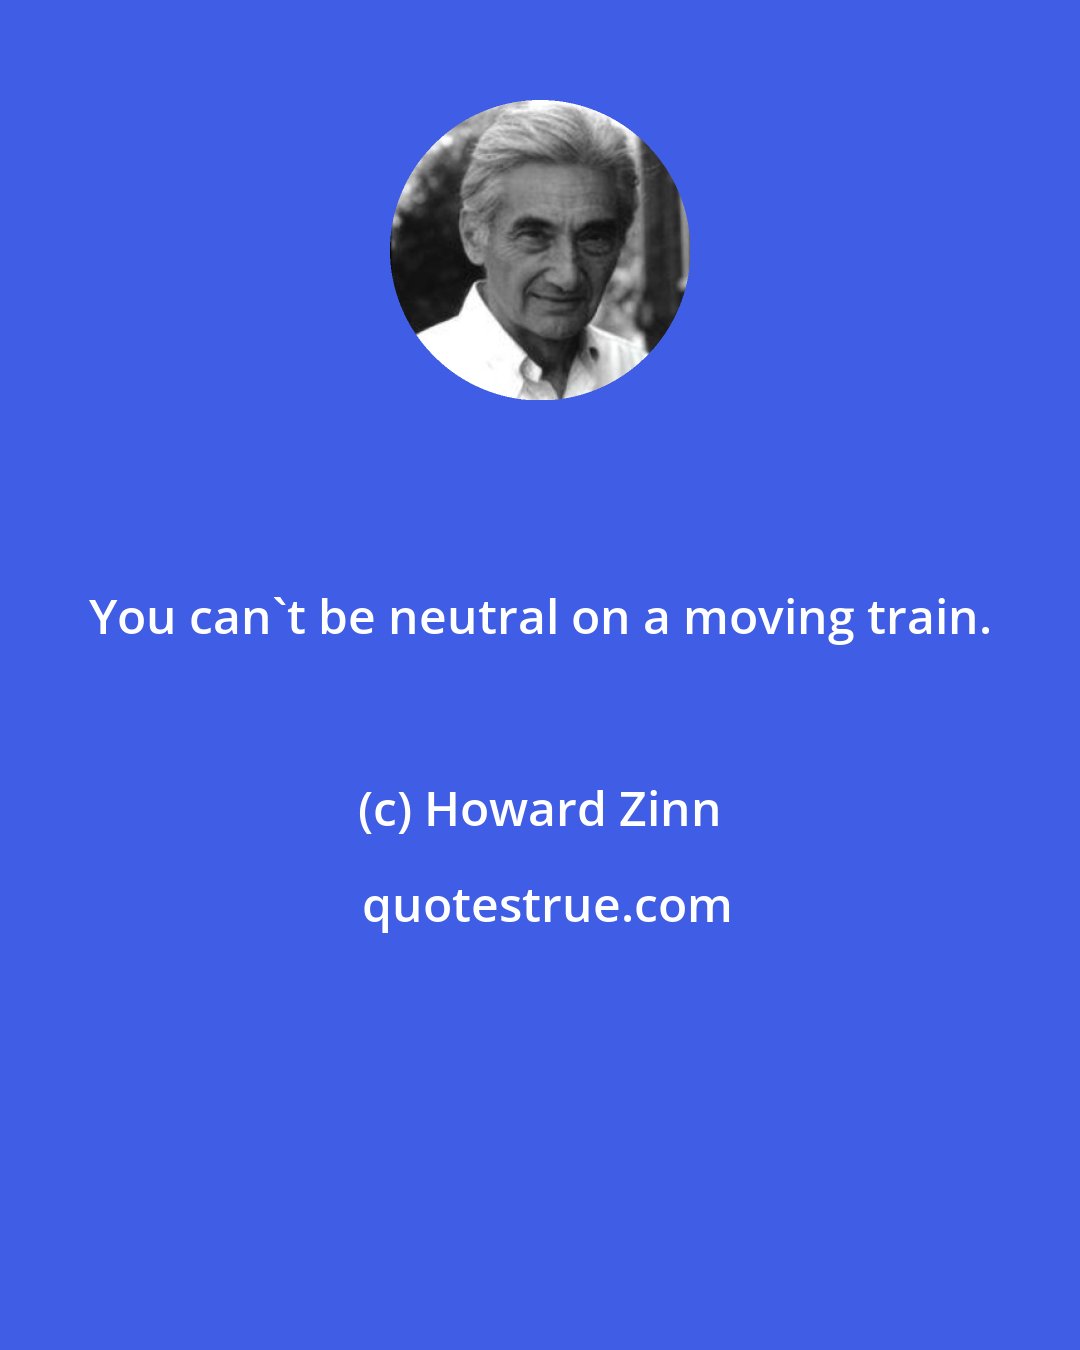 Howard Zinn: You can't be neutral on a moving train.